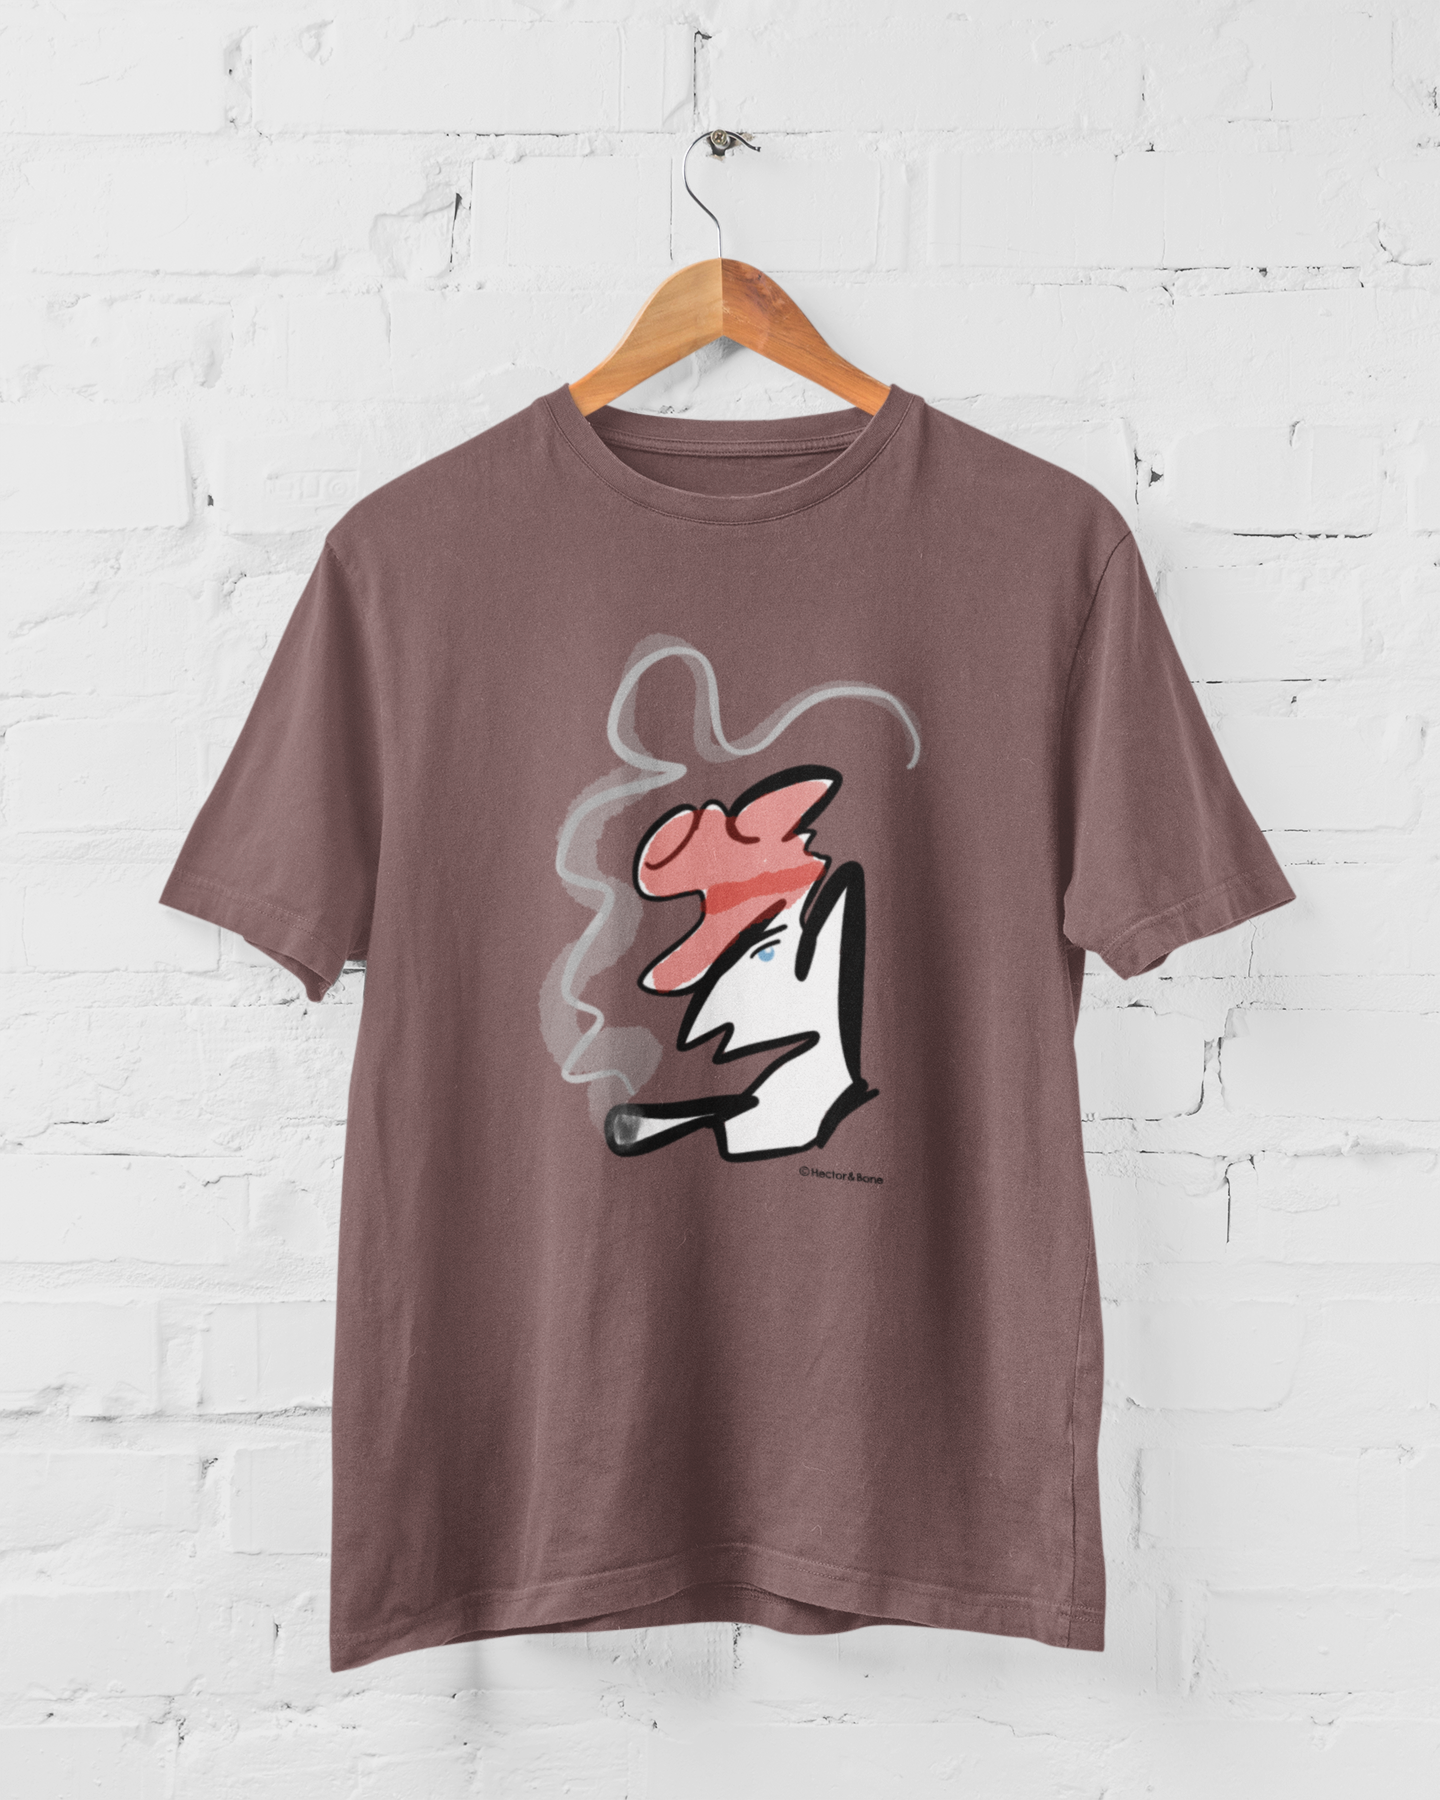 Coffee colour quality vegan cotton t-shirt with Hector and Bone smoking man Monsieur Gaulois illustrated Parisian abstract t-shirt design